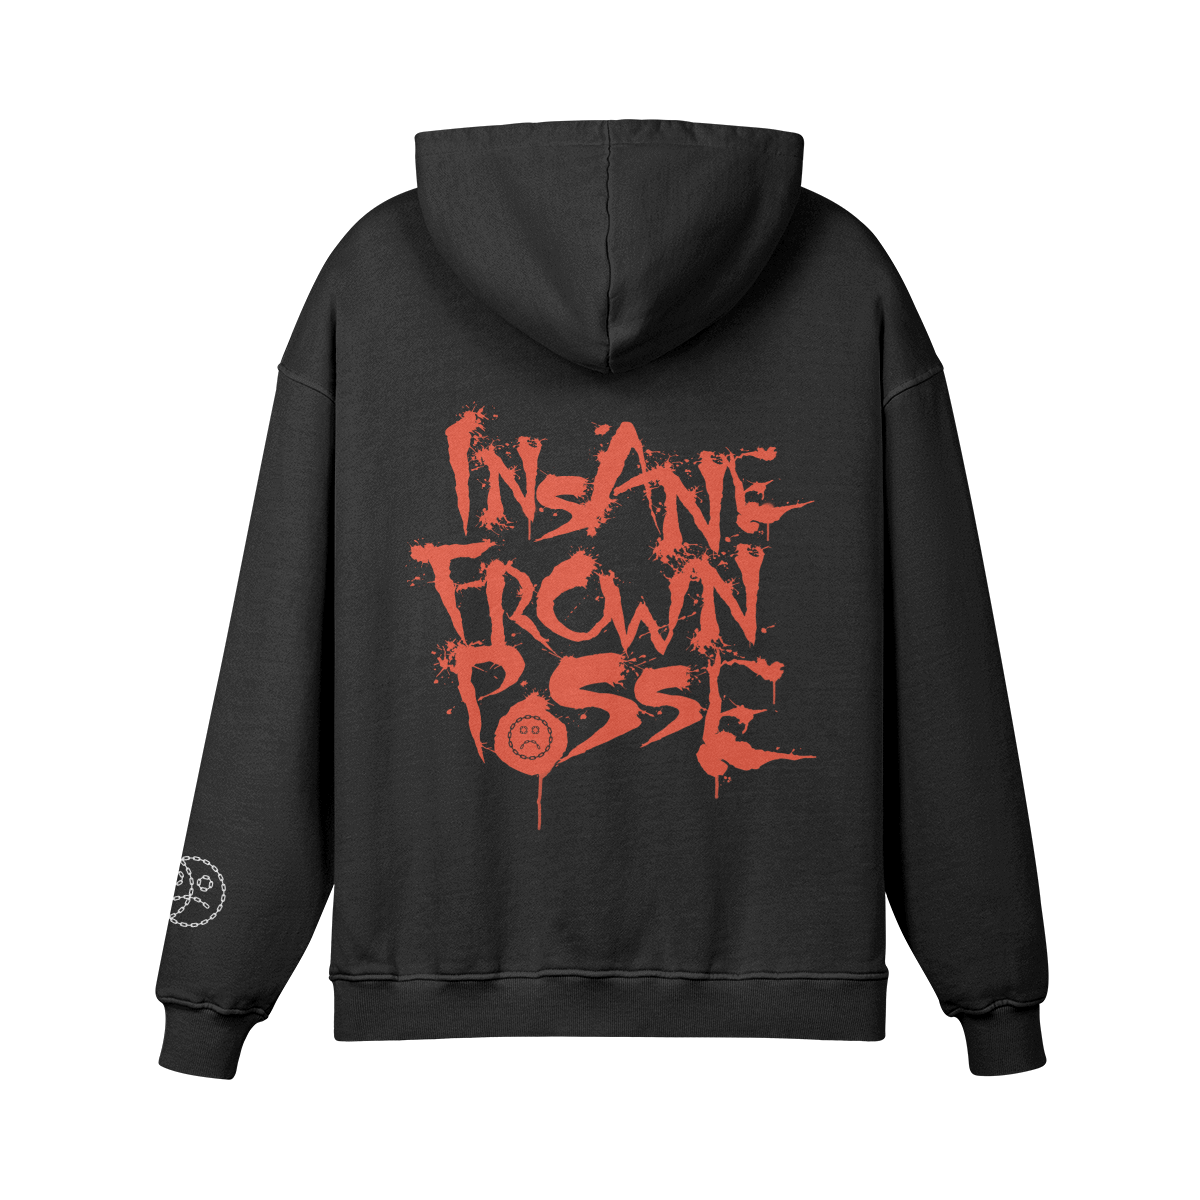 Insane Frown Posse Oversized Hoodie Faded Black